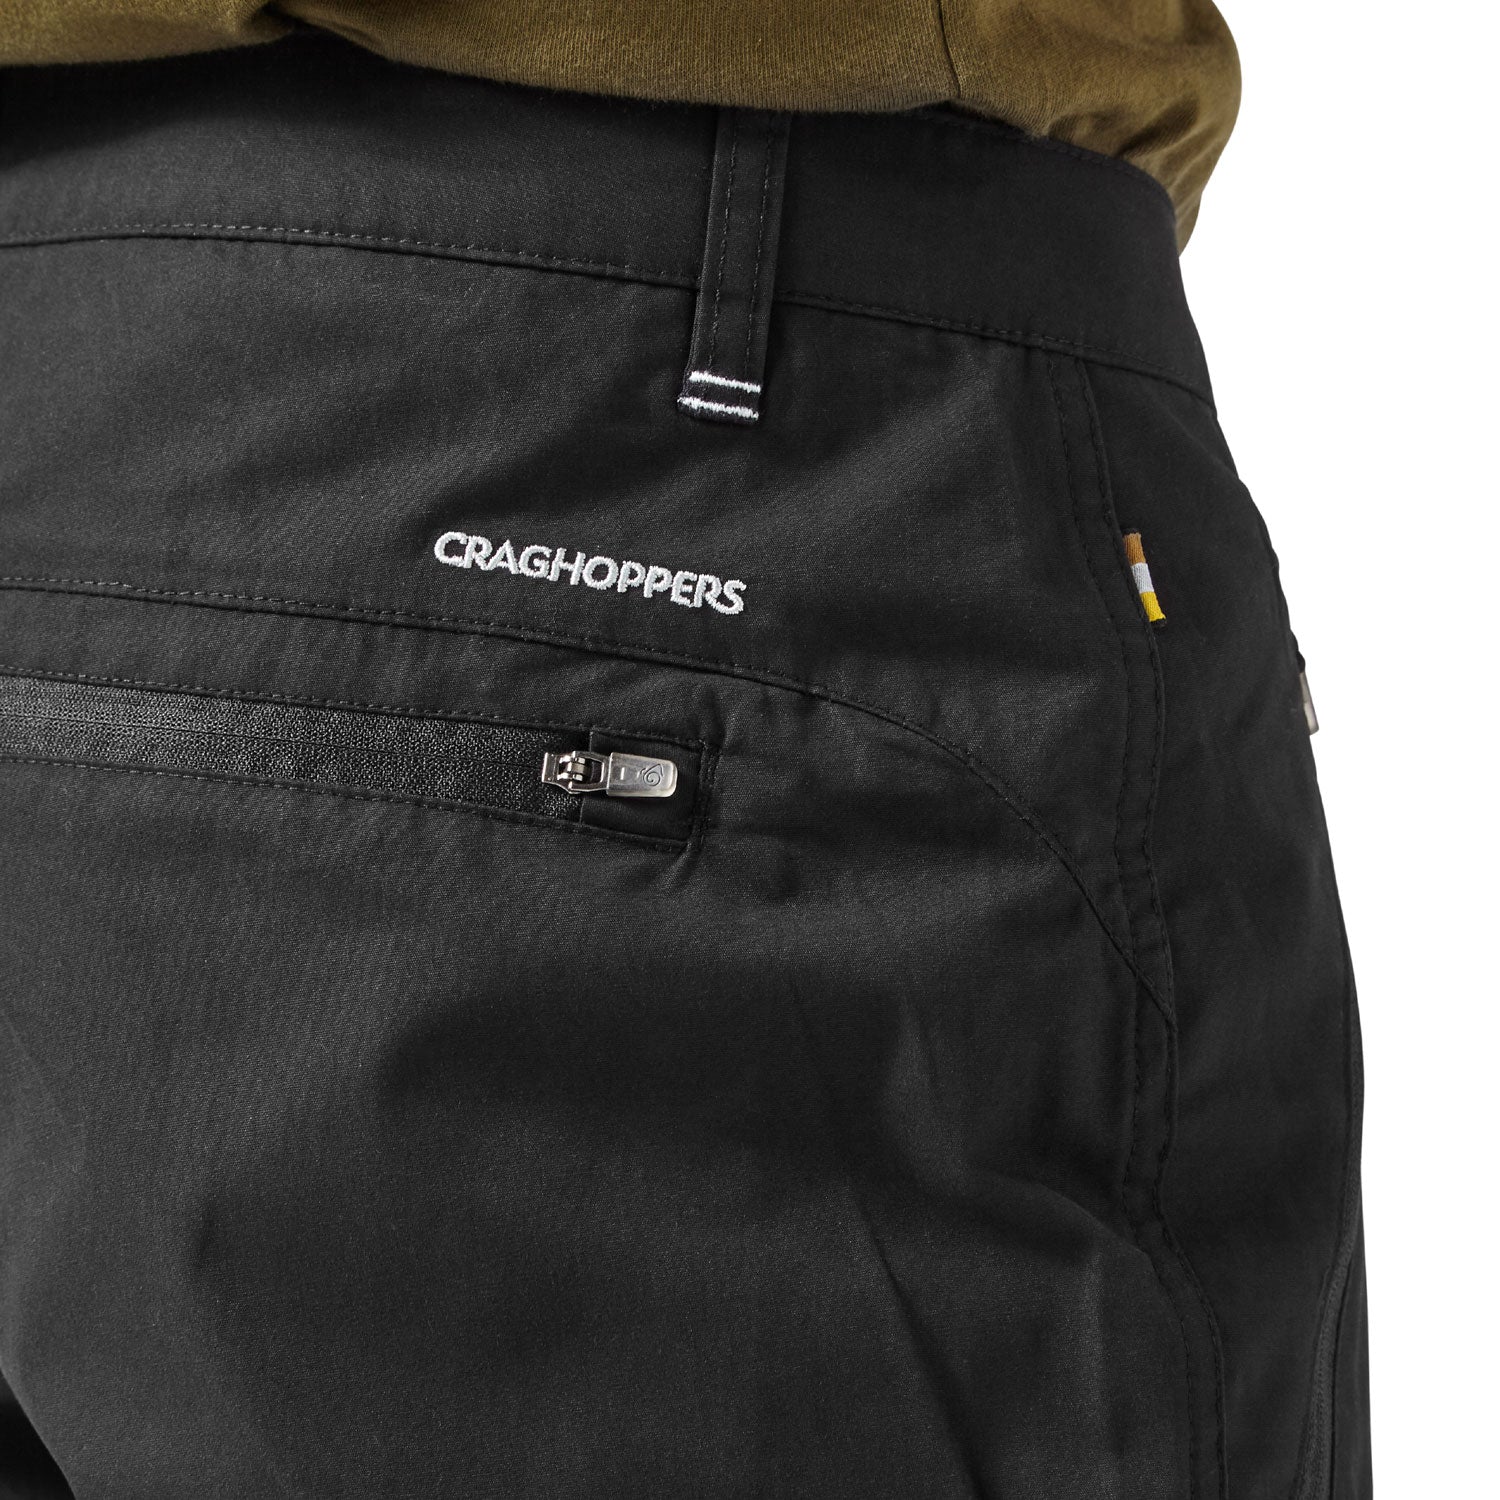 Craghoppers trouser pocket view